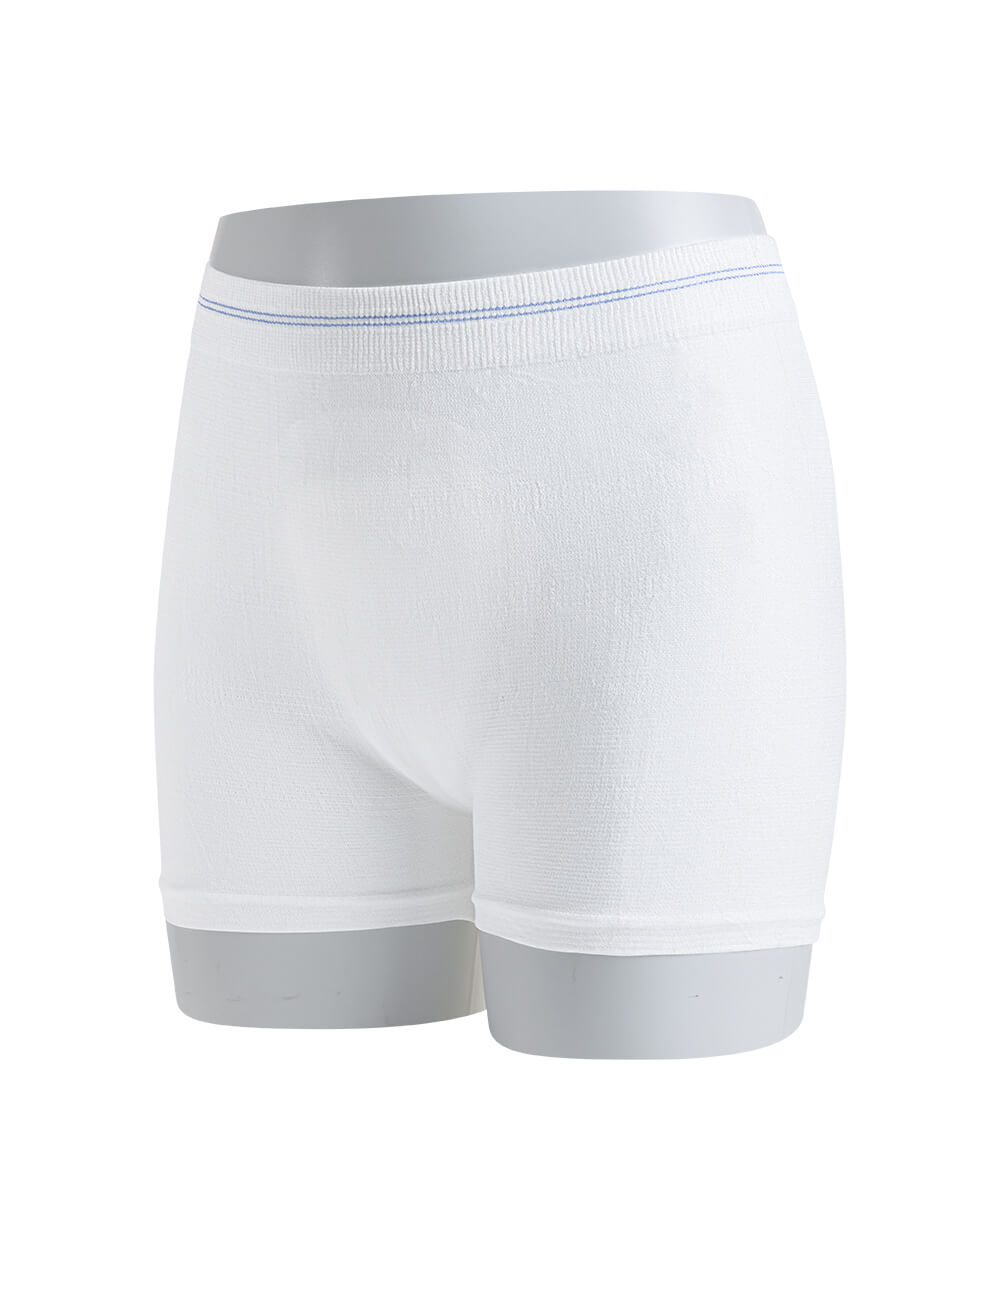 Postpartum Underwear For C-Section & Incontinence - 9122N